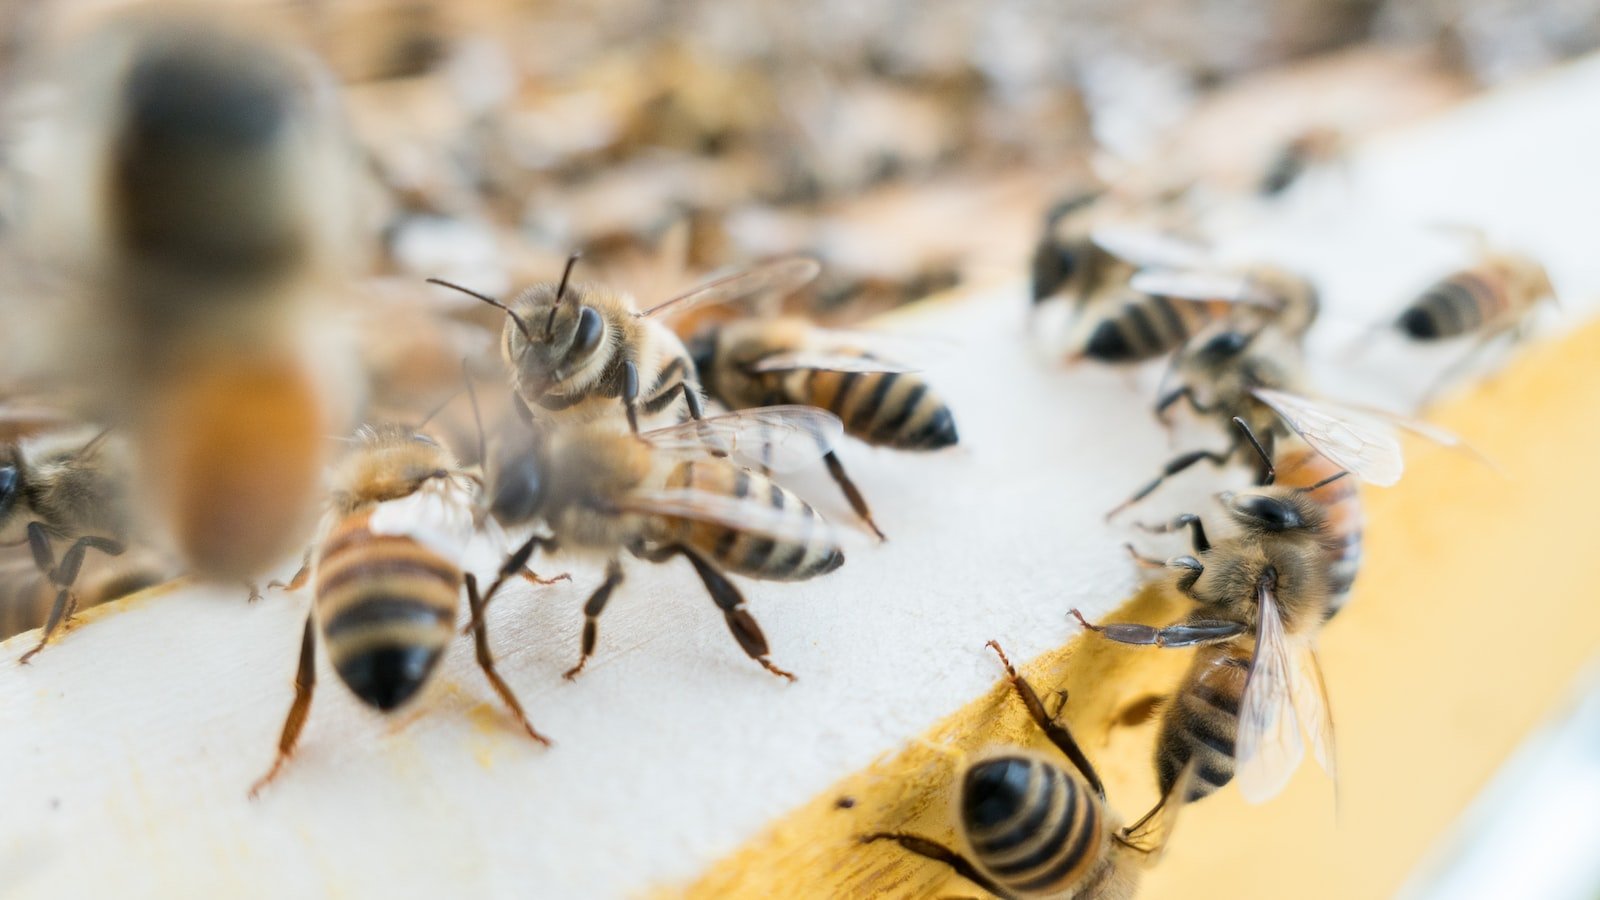 The Importance of Bees as Pollinators in Sustainable Fisheries